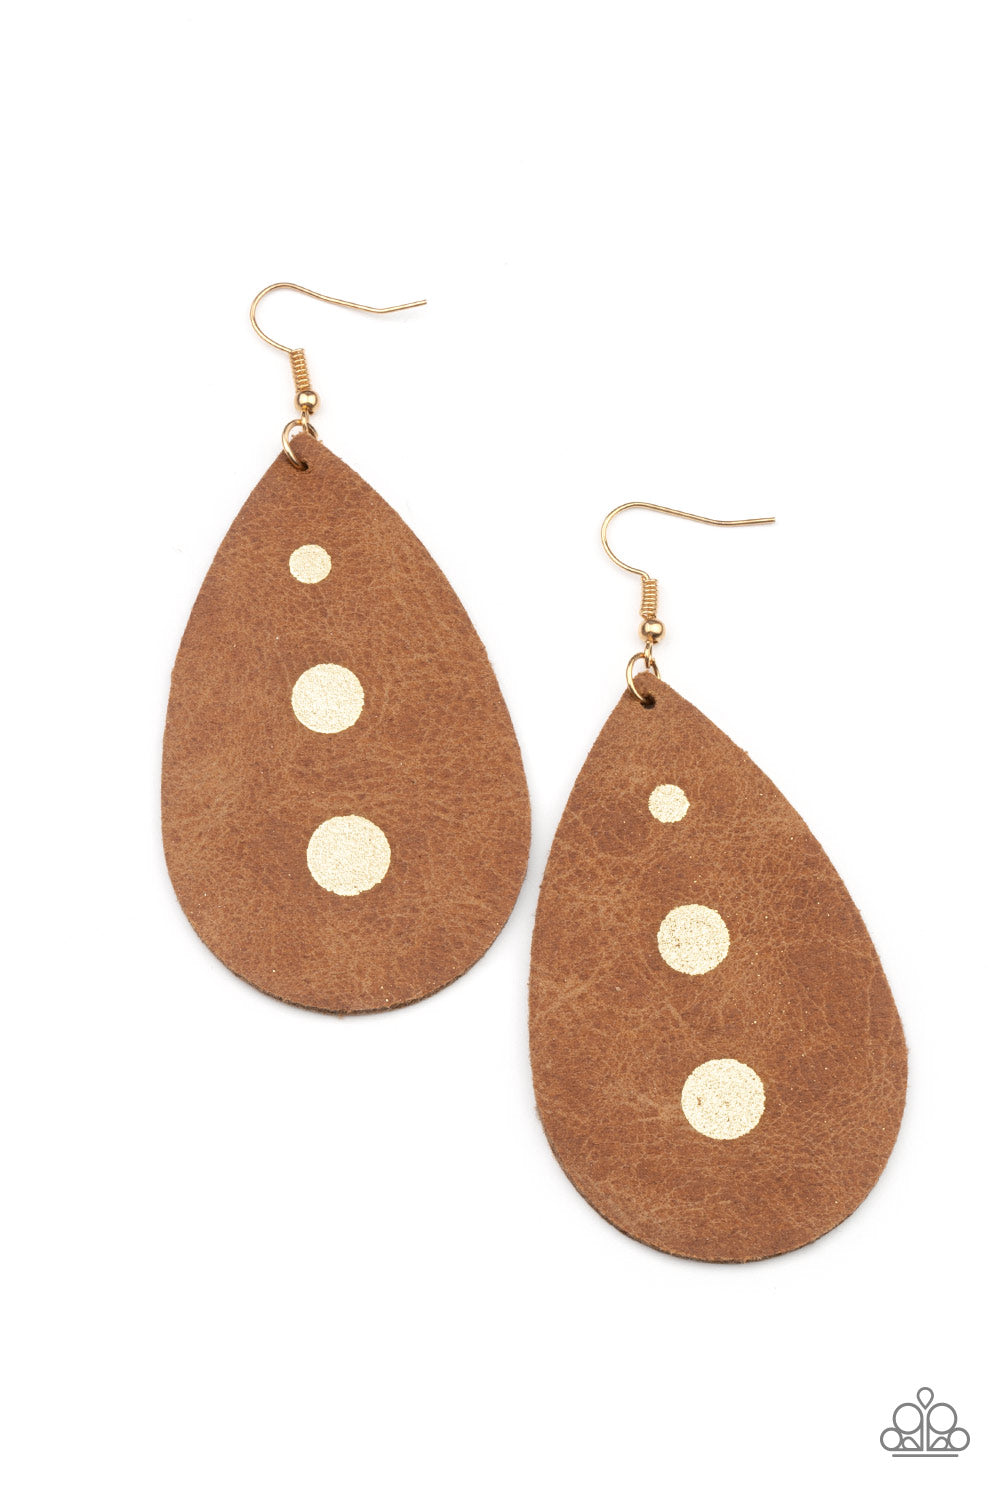 Rustic Torrent - Gold & Brown Leather Earrings - Princess Glam Shop